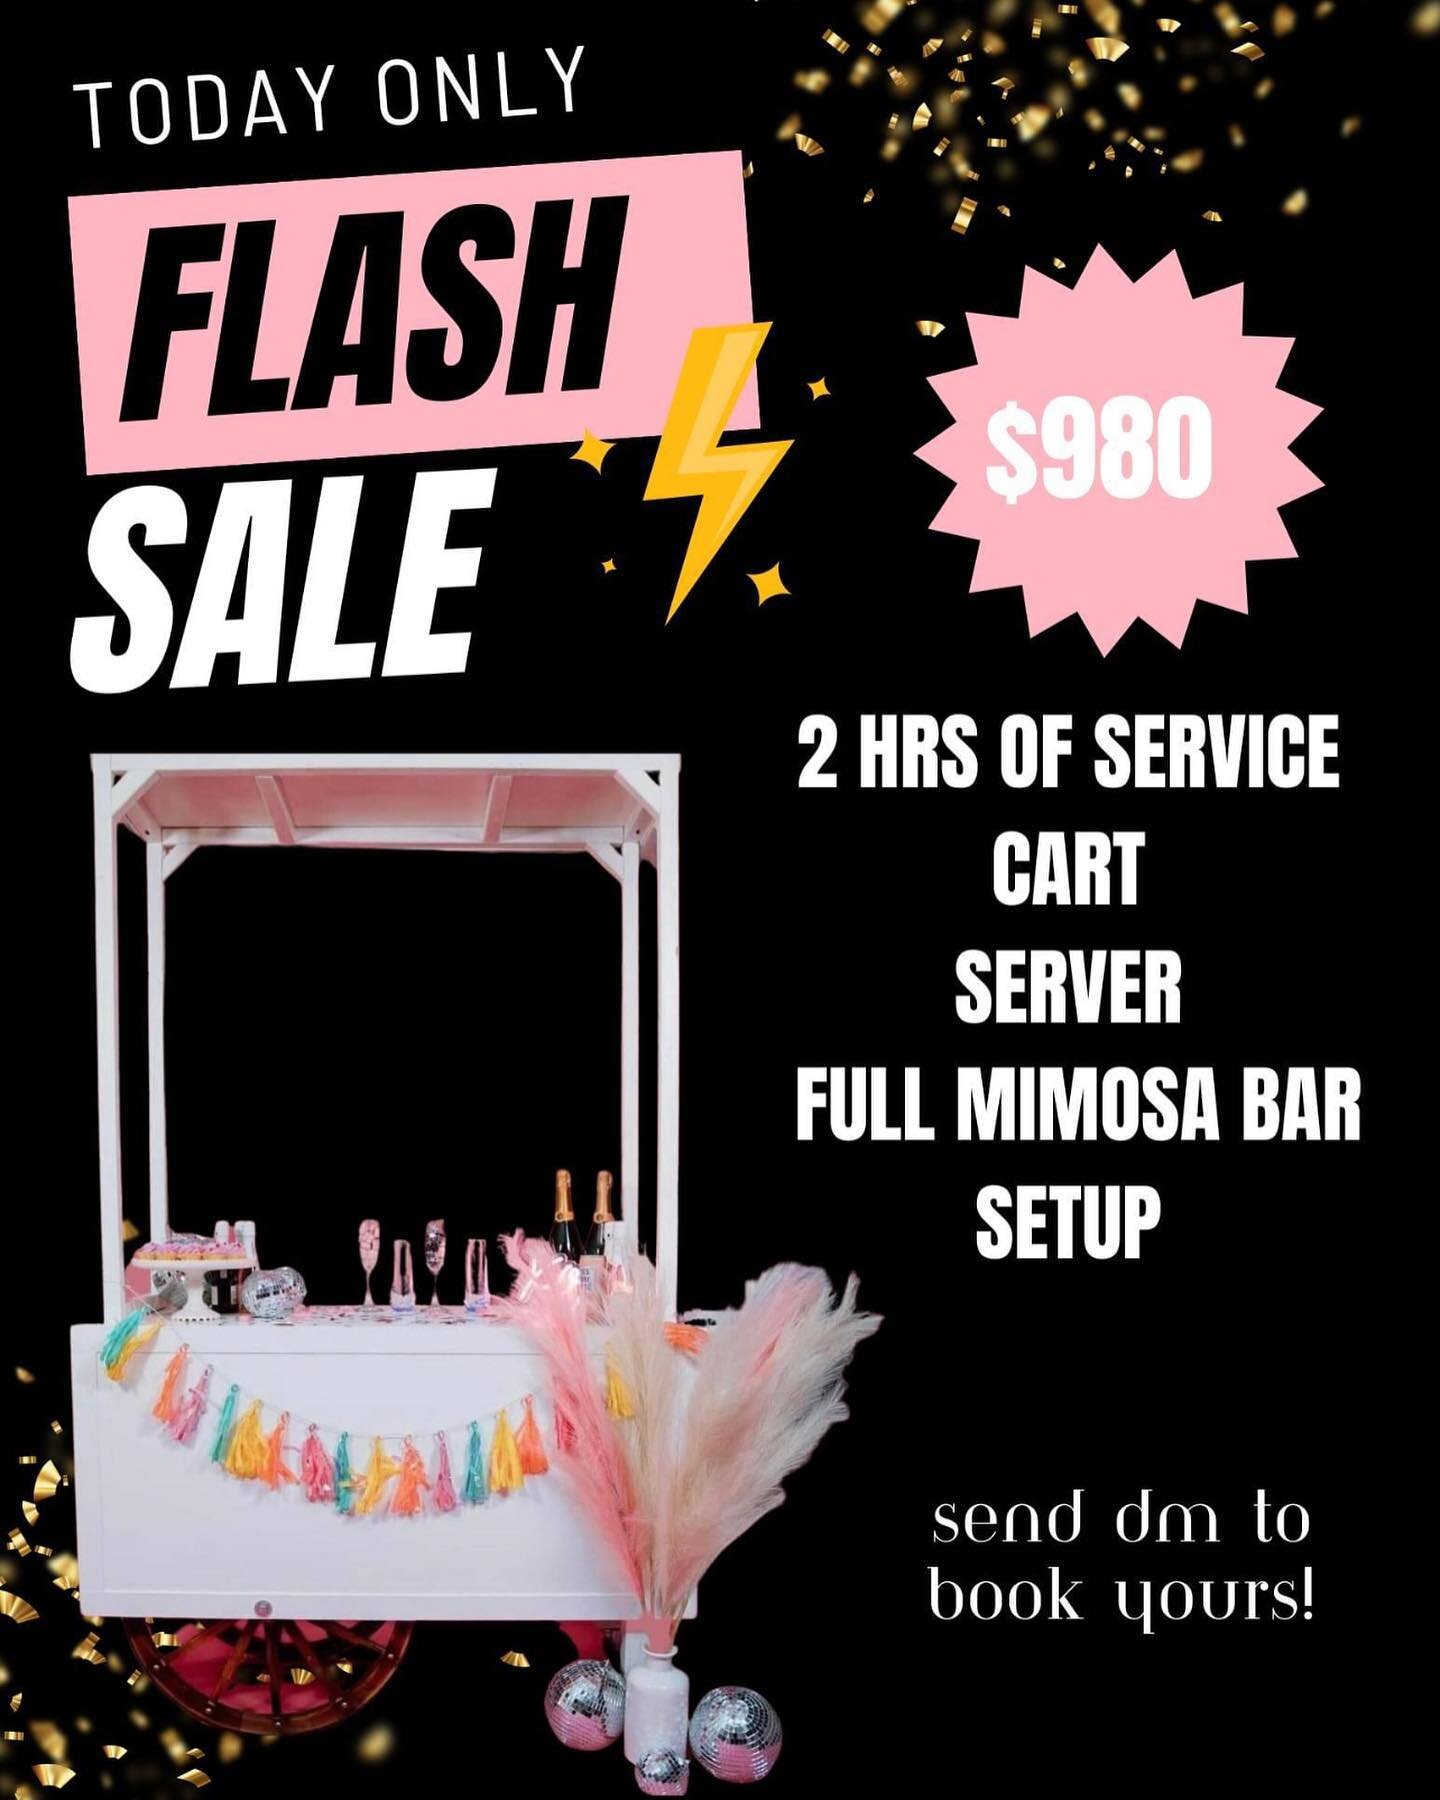 🎉𝑺𝑼𝑷𝑬𝑹 𝑭𝑳𝑨𝑺𝑯 𝑺𝑨𝑳𝑬 𝑻𝑶𝑫𝑨𝒀 𝑶𝑵𝑳𝒀 🎉
Have you been dreaming of having one of our famous mimosa carts? Now is your chance! This sale ends tonight, make sure to send us a DM to book! 🥂